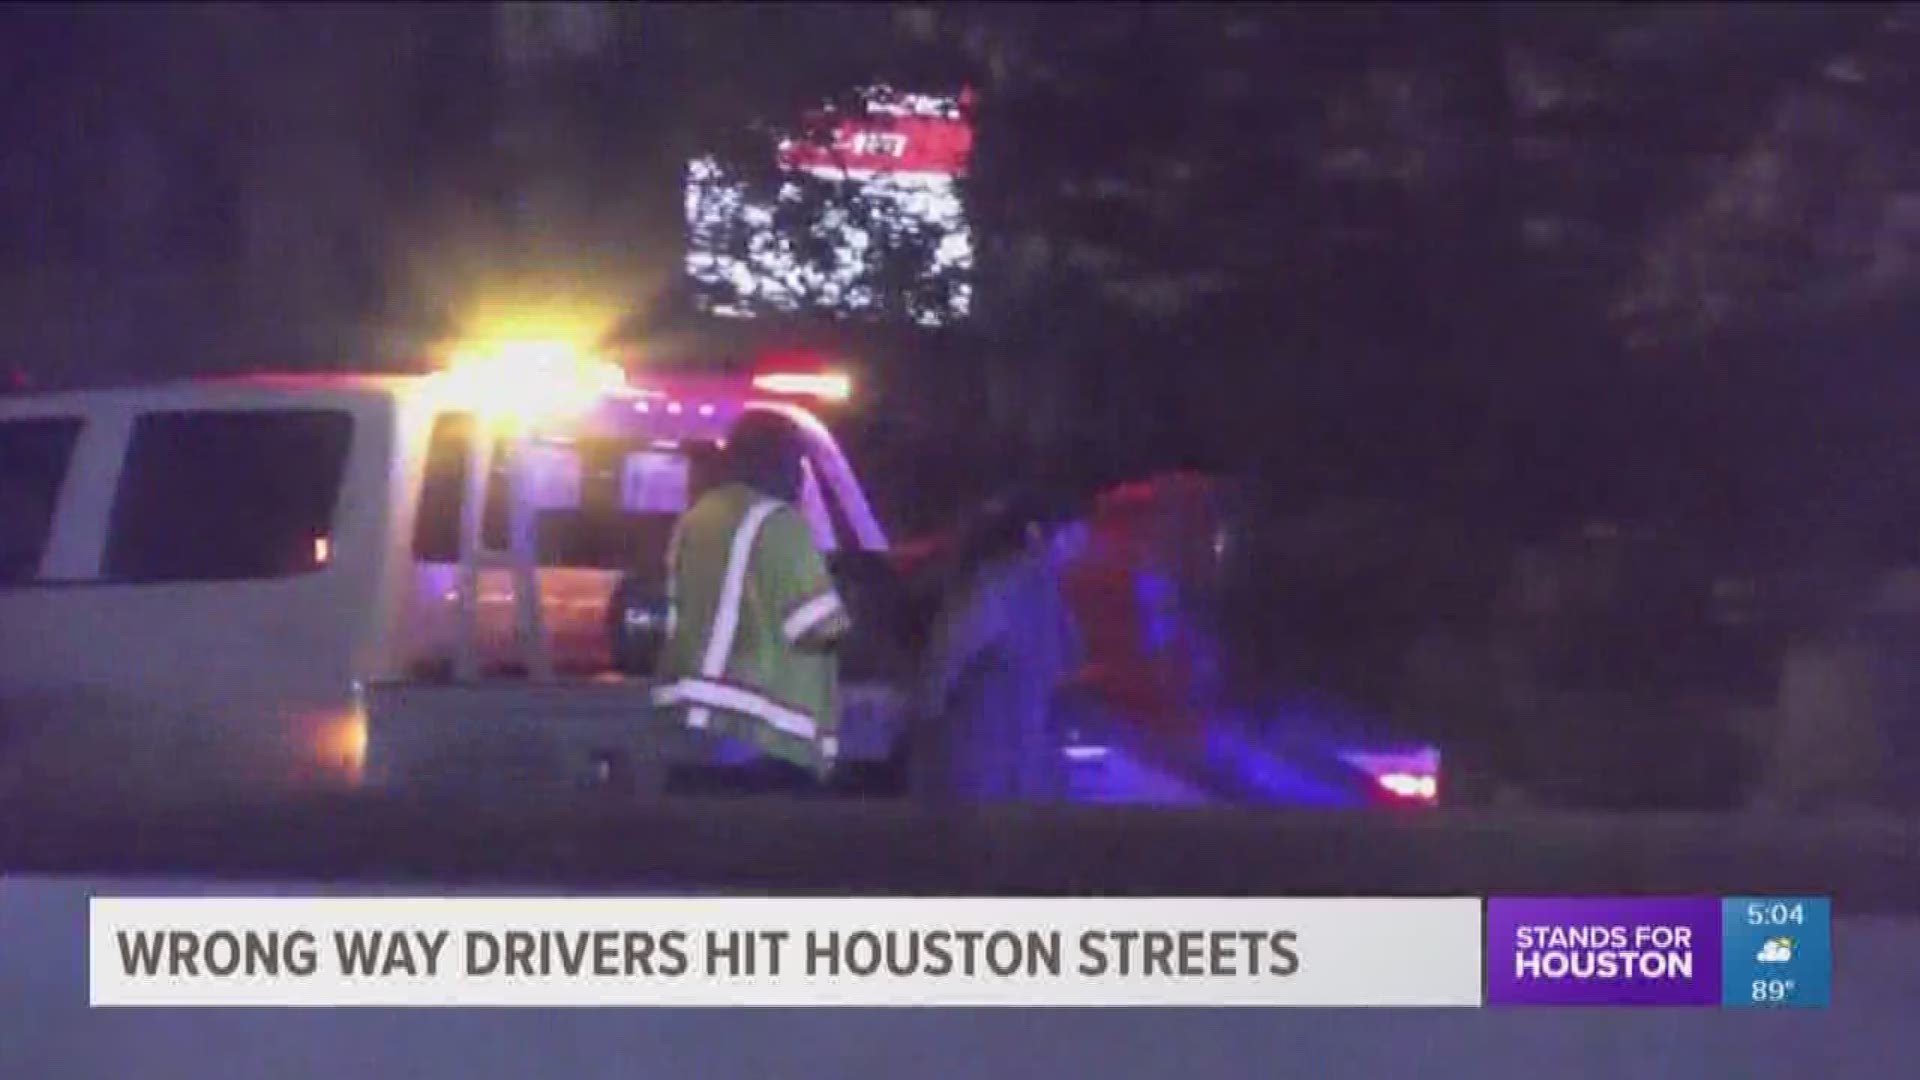 Houston's wrong-way drunk driving problem is persistent and does not appear to be getting any better, according to some experts.